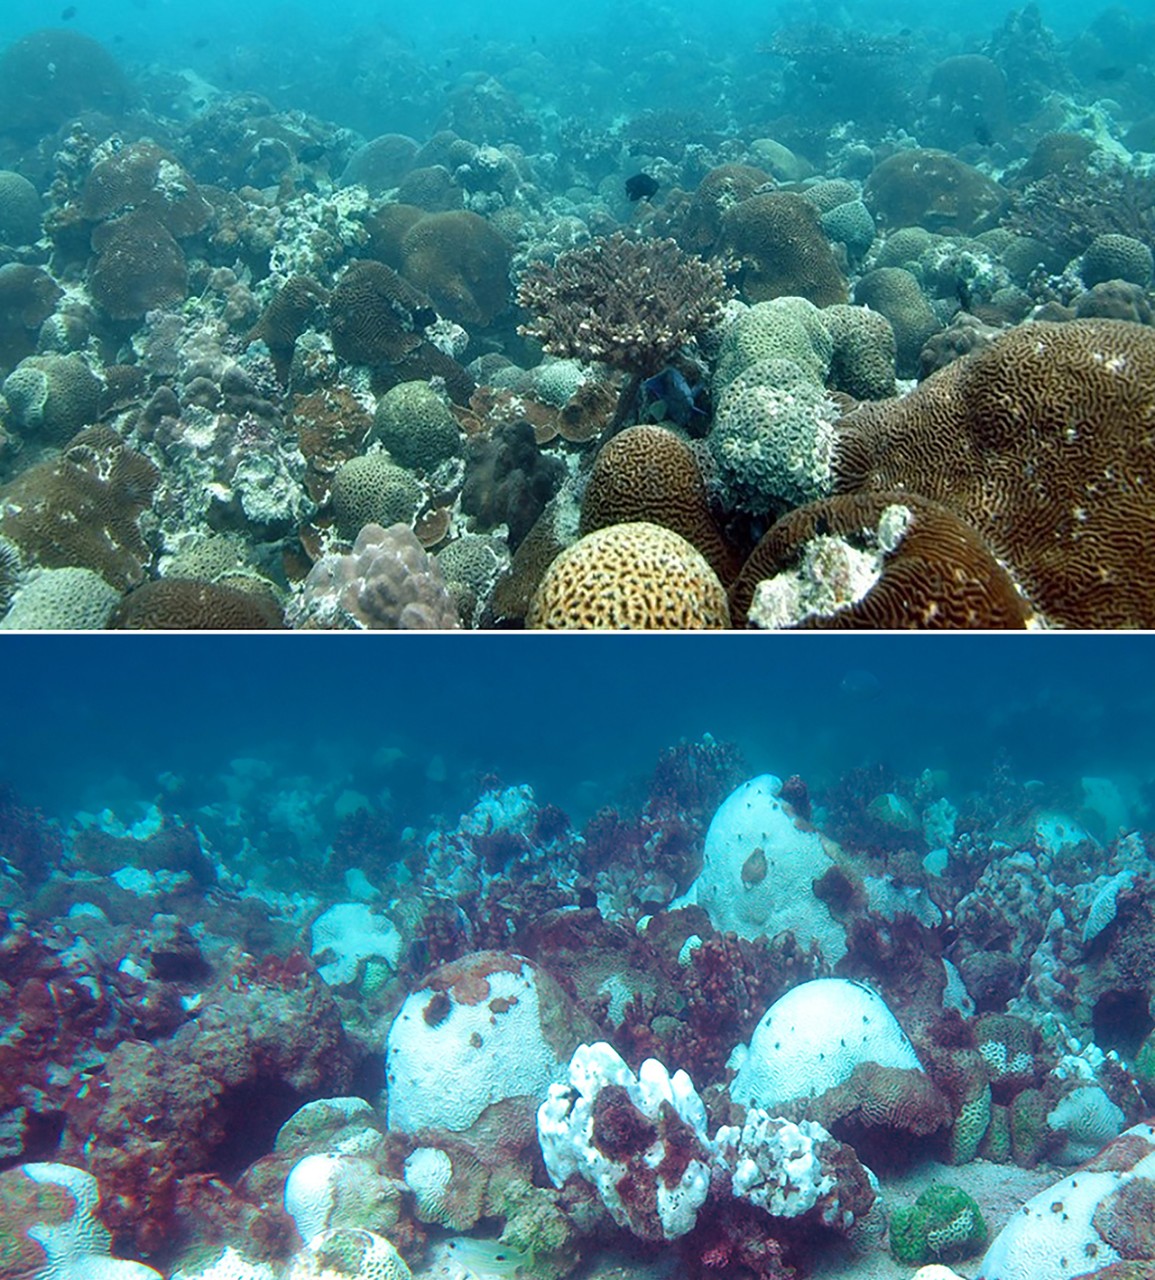 The coral reef at Saadiyat Island in April 2017 and in August 2017, when low winds led to extreme sea temperatures that induce mass bleaching of corals across the southern Gulf. Noura Al Mansouri/NYUAD